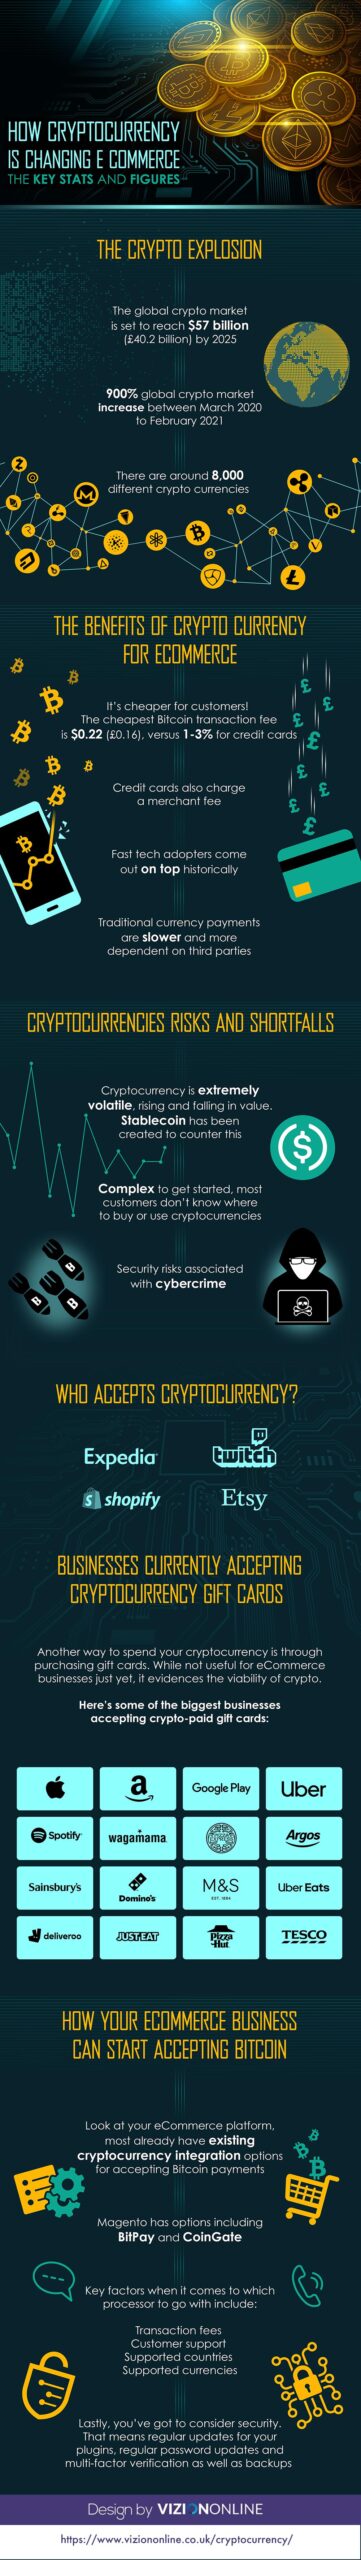 how cryptocurrency is changing e commerce